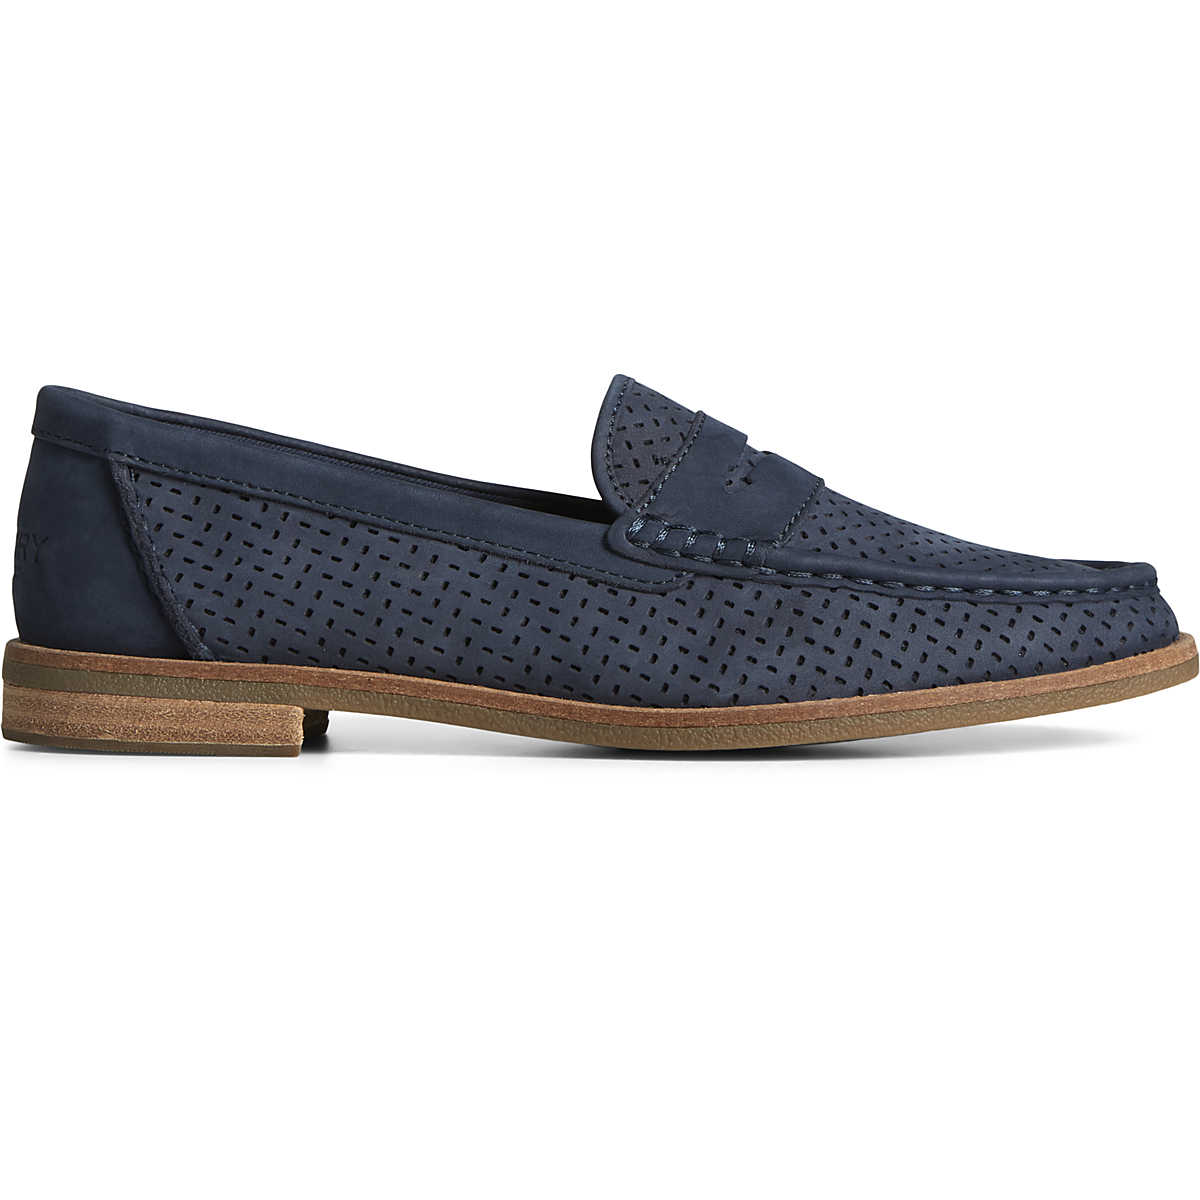 Seaport Perforated Penny Loafer, Navy, dynamic 1